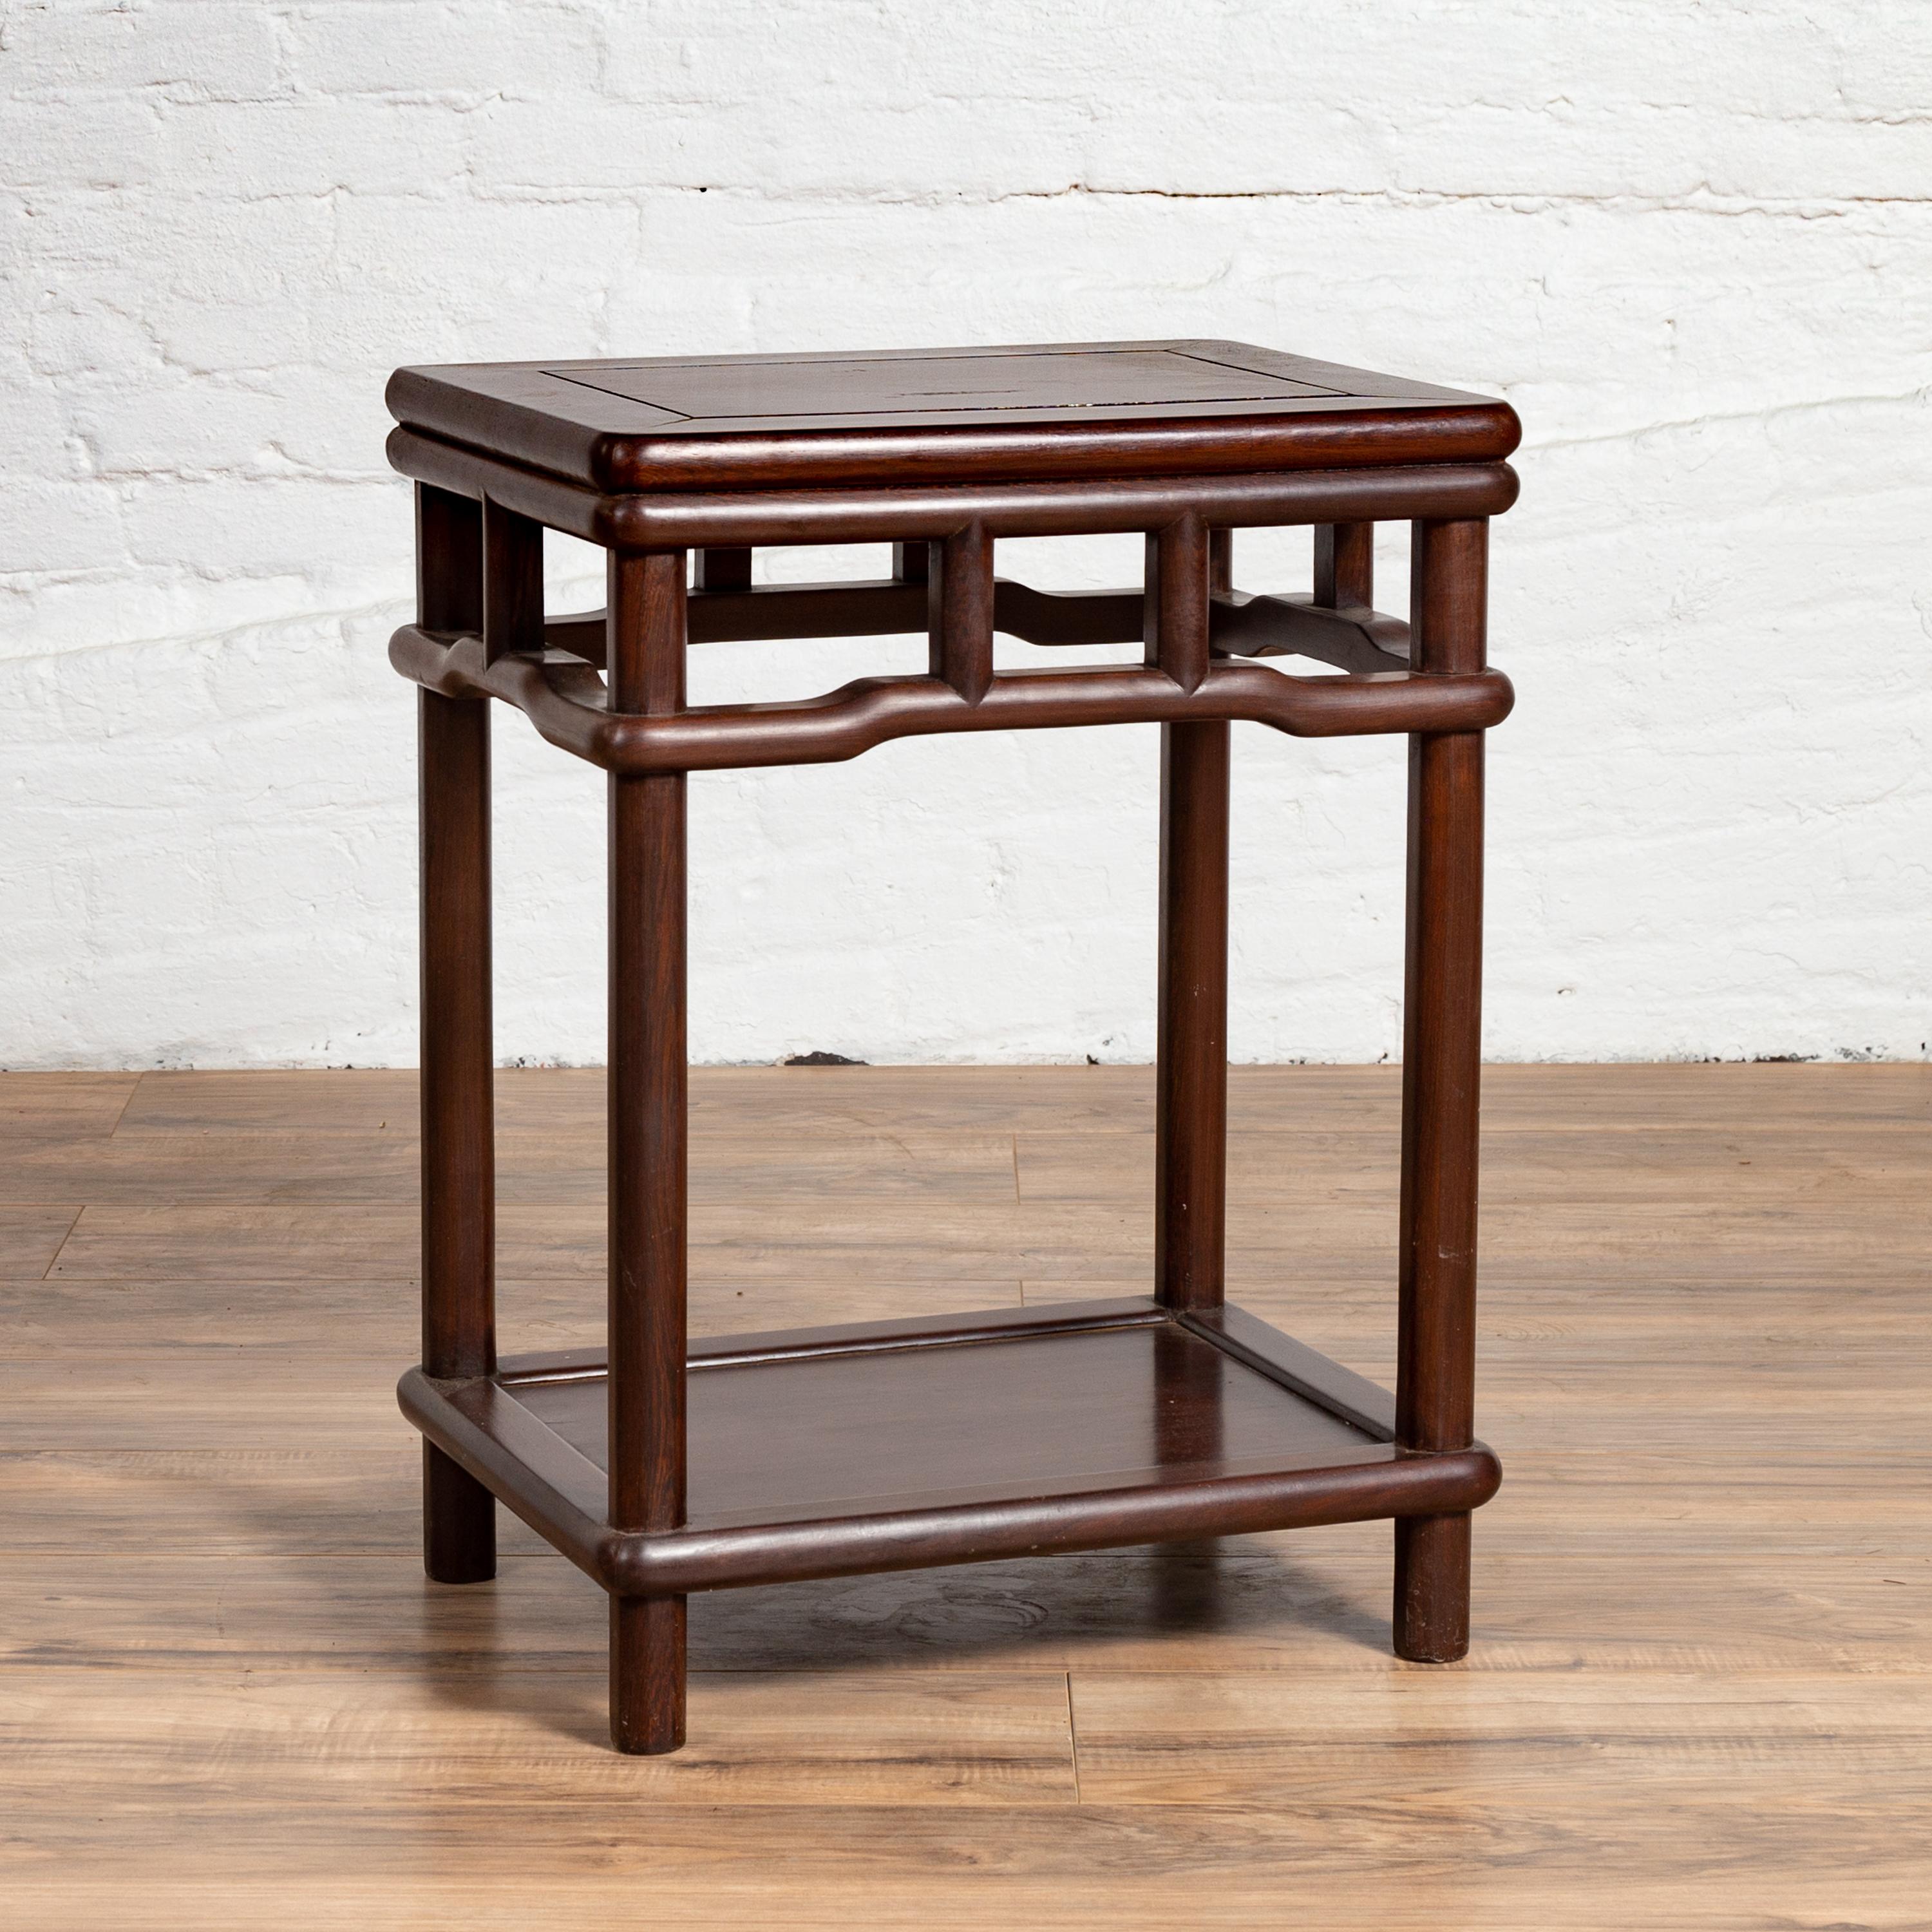 Chinese Ming Style Accent Side Table with Dark Wood Patina and Humpback Apron In Good Condition For Sale In Yonkers, NY